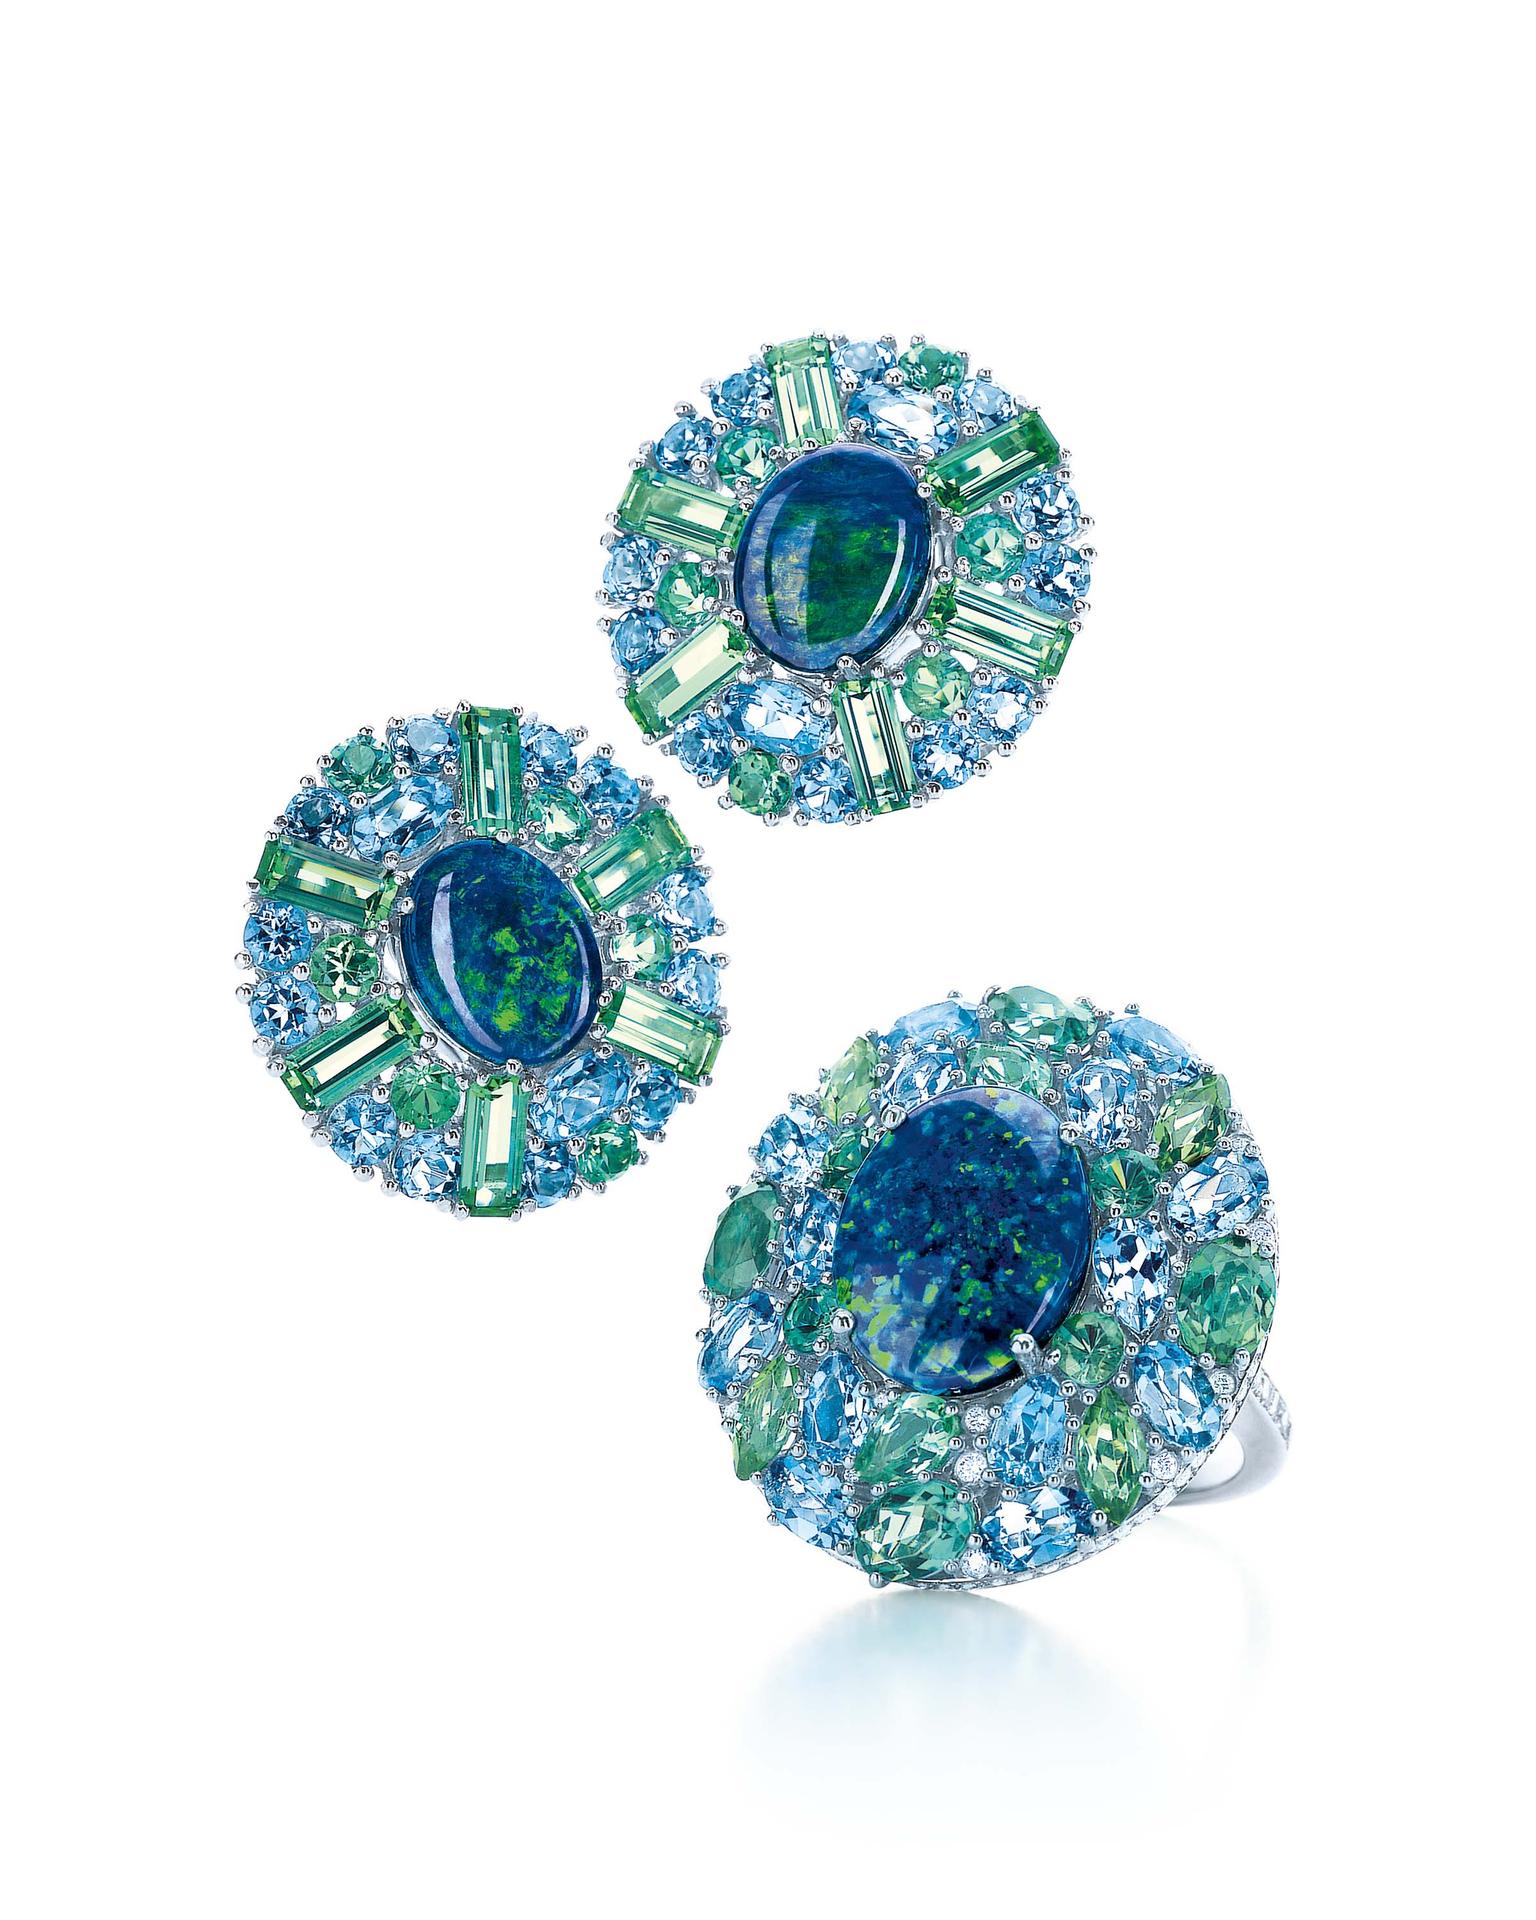 Tiffany & Co. Blue Book Collection black opal, tourmaline and aquamarine earrings and ring set in platinum (£POA)